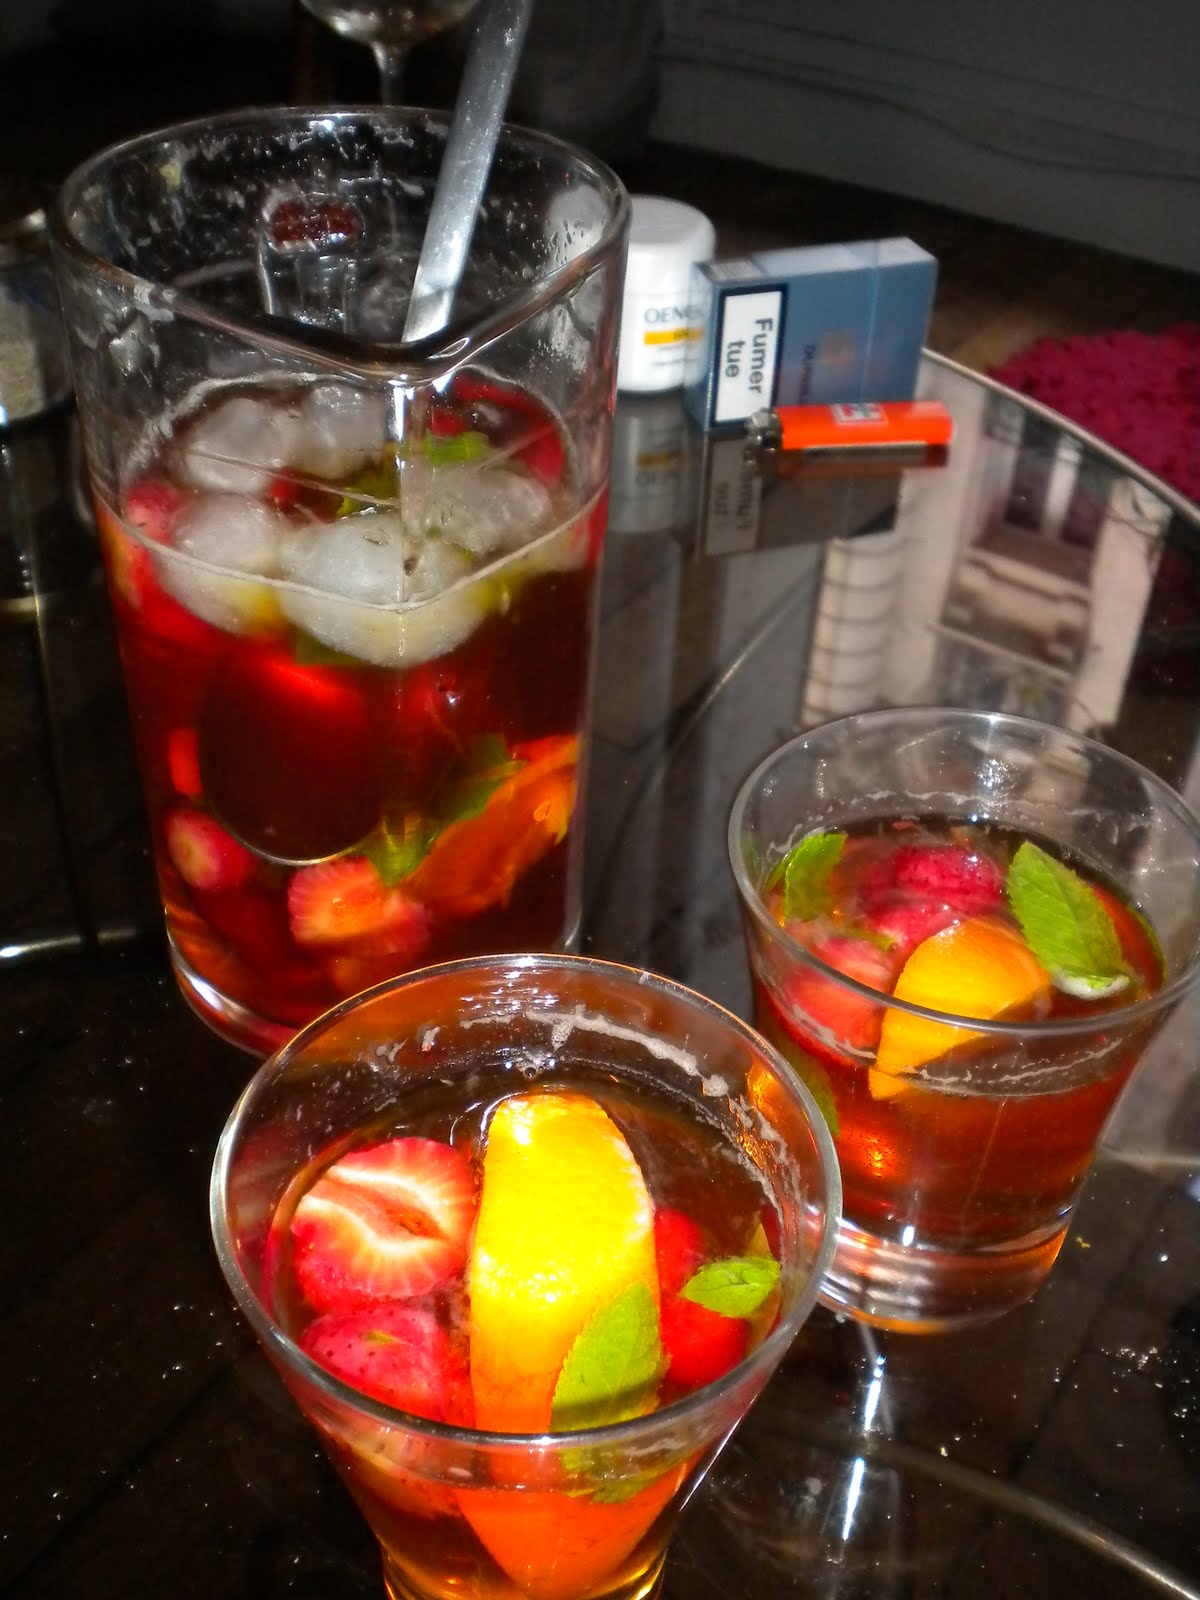 The tail of the Rubble: Pimm's o'clock